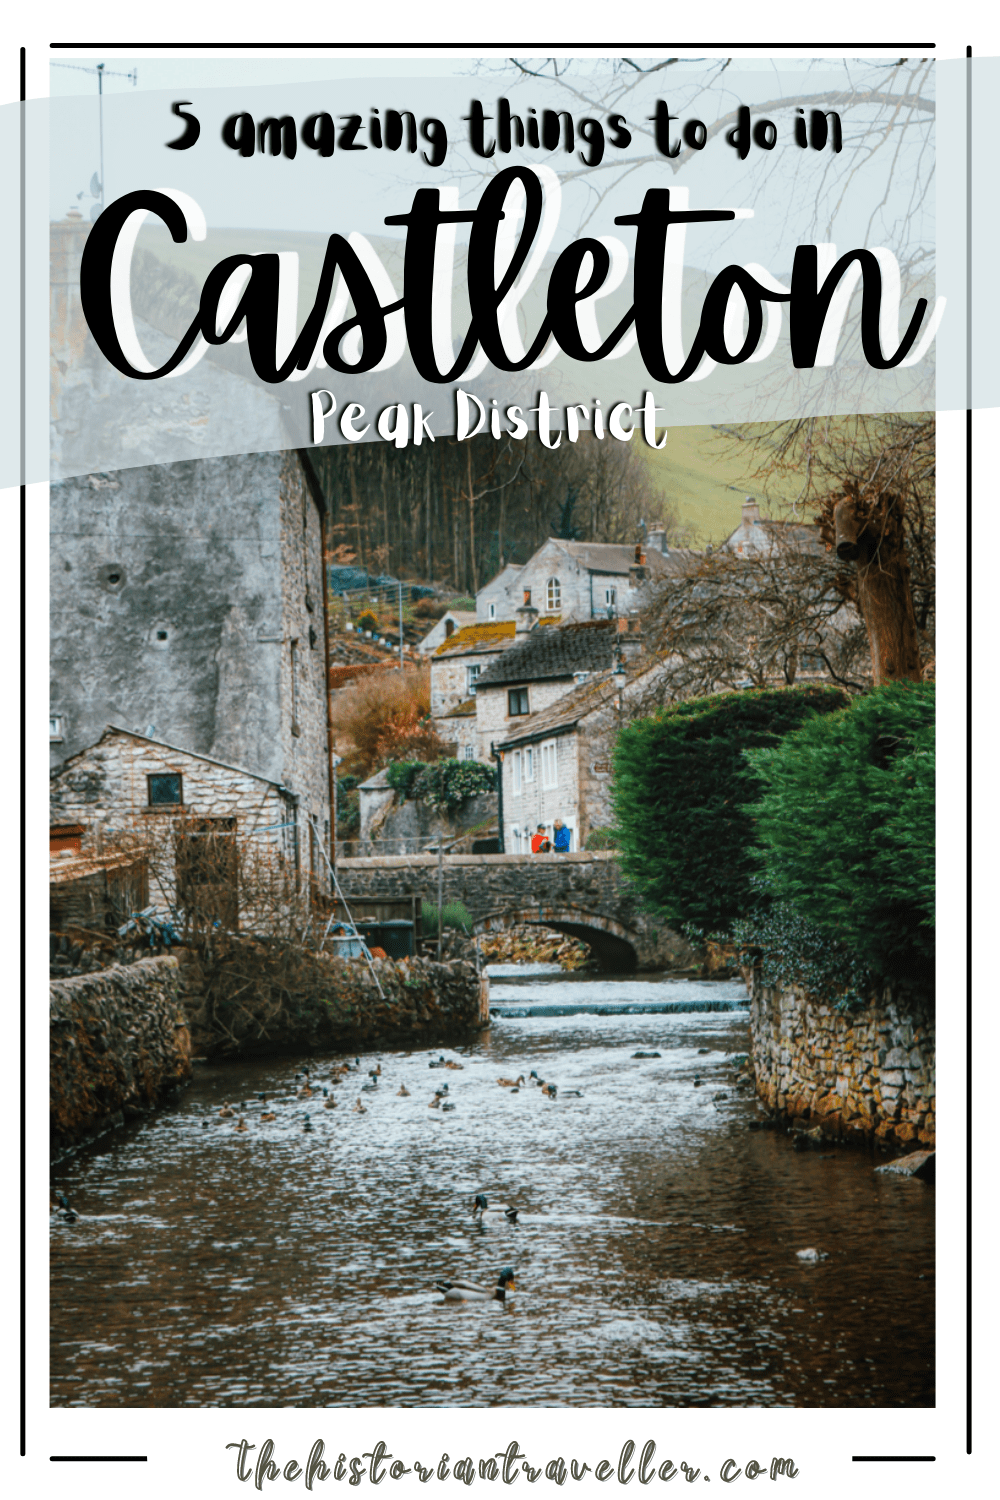  5 amazing things to do in Castleton, Peak District